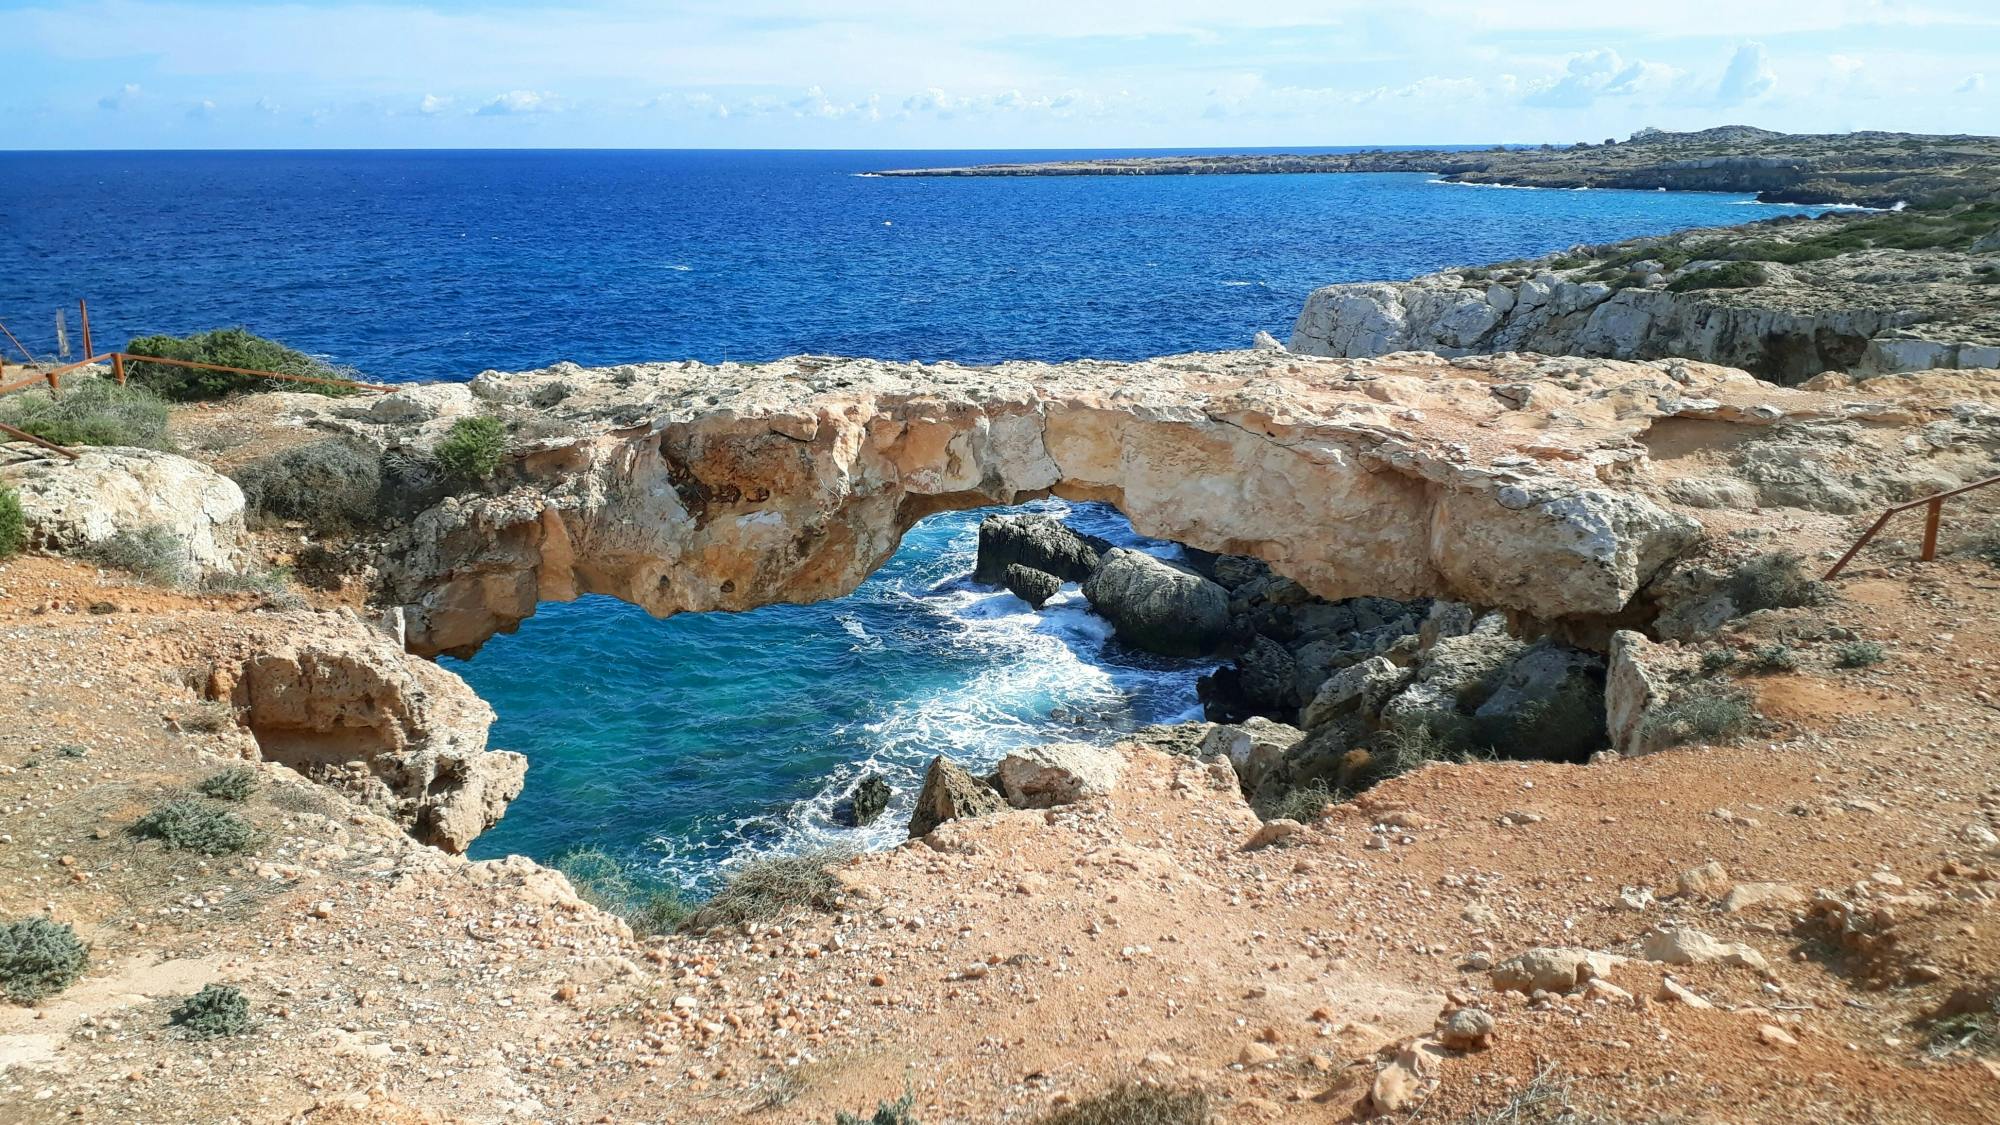 Guided Panoramic Photo Stop Tour with Wine Tasting in Protaras